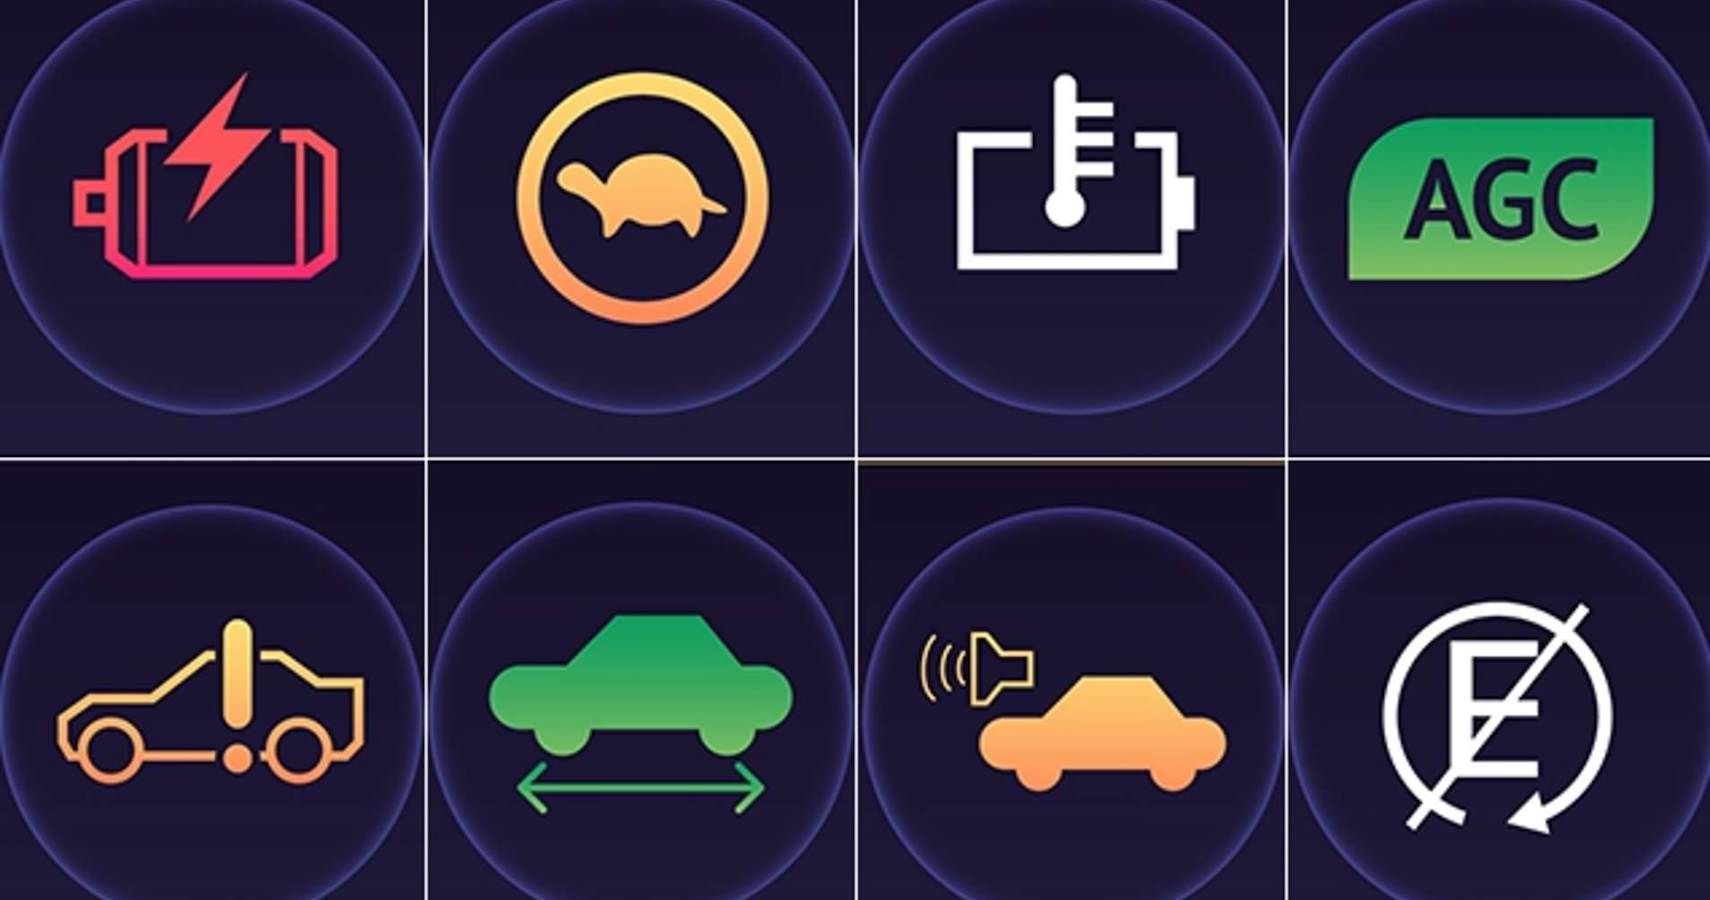 Electric And Hybrid Dashboard Symbols: How Many Can You Identify?